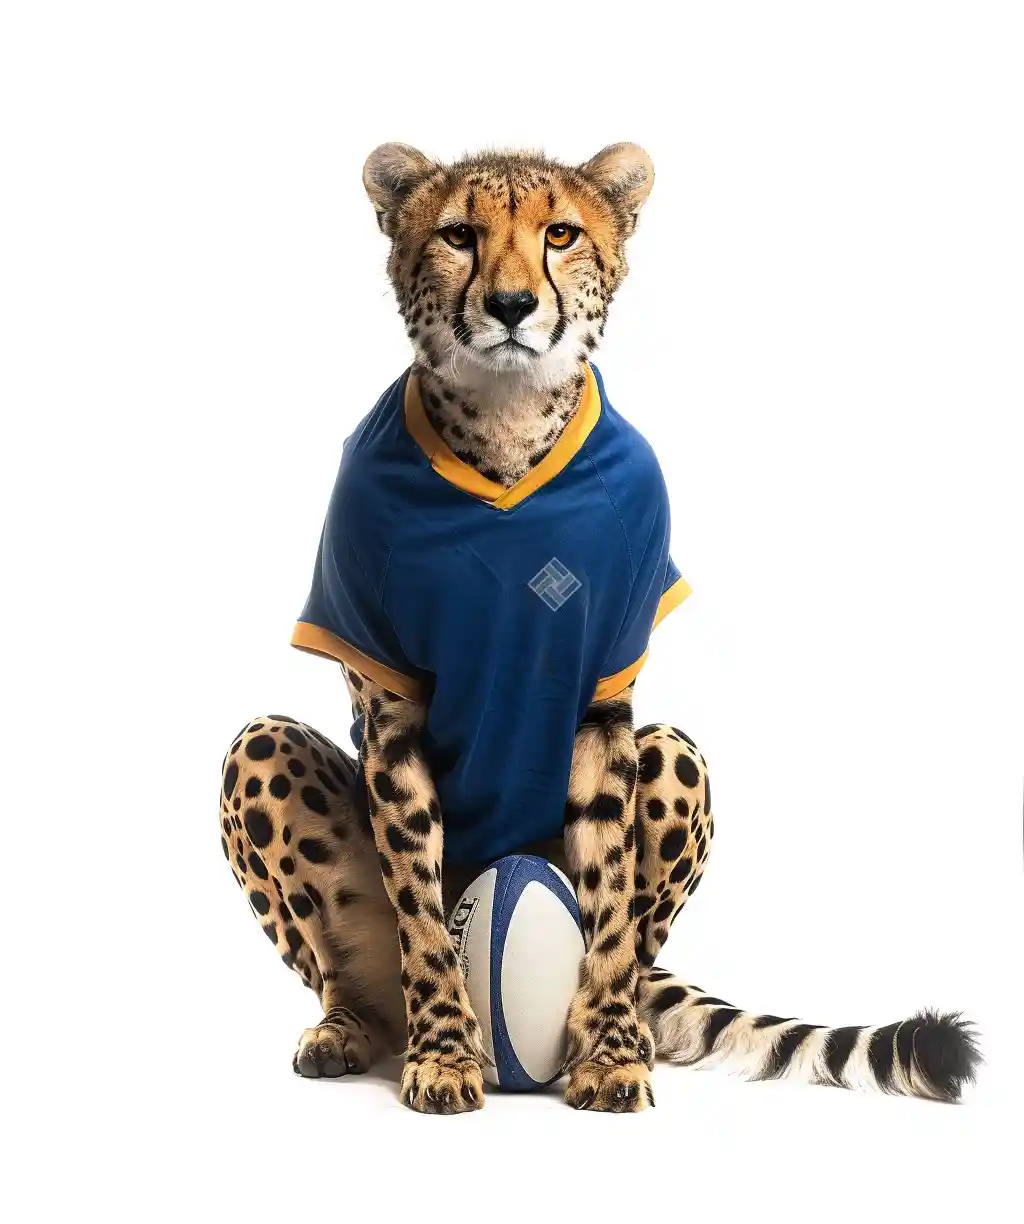 A cheetah with a rugby ball and blue jersey